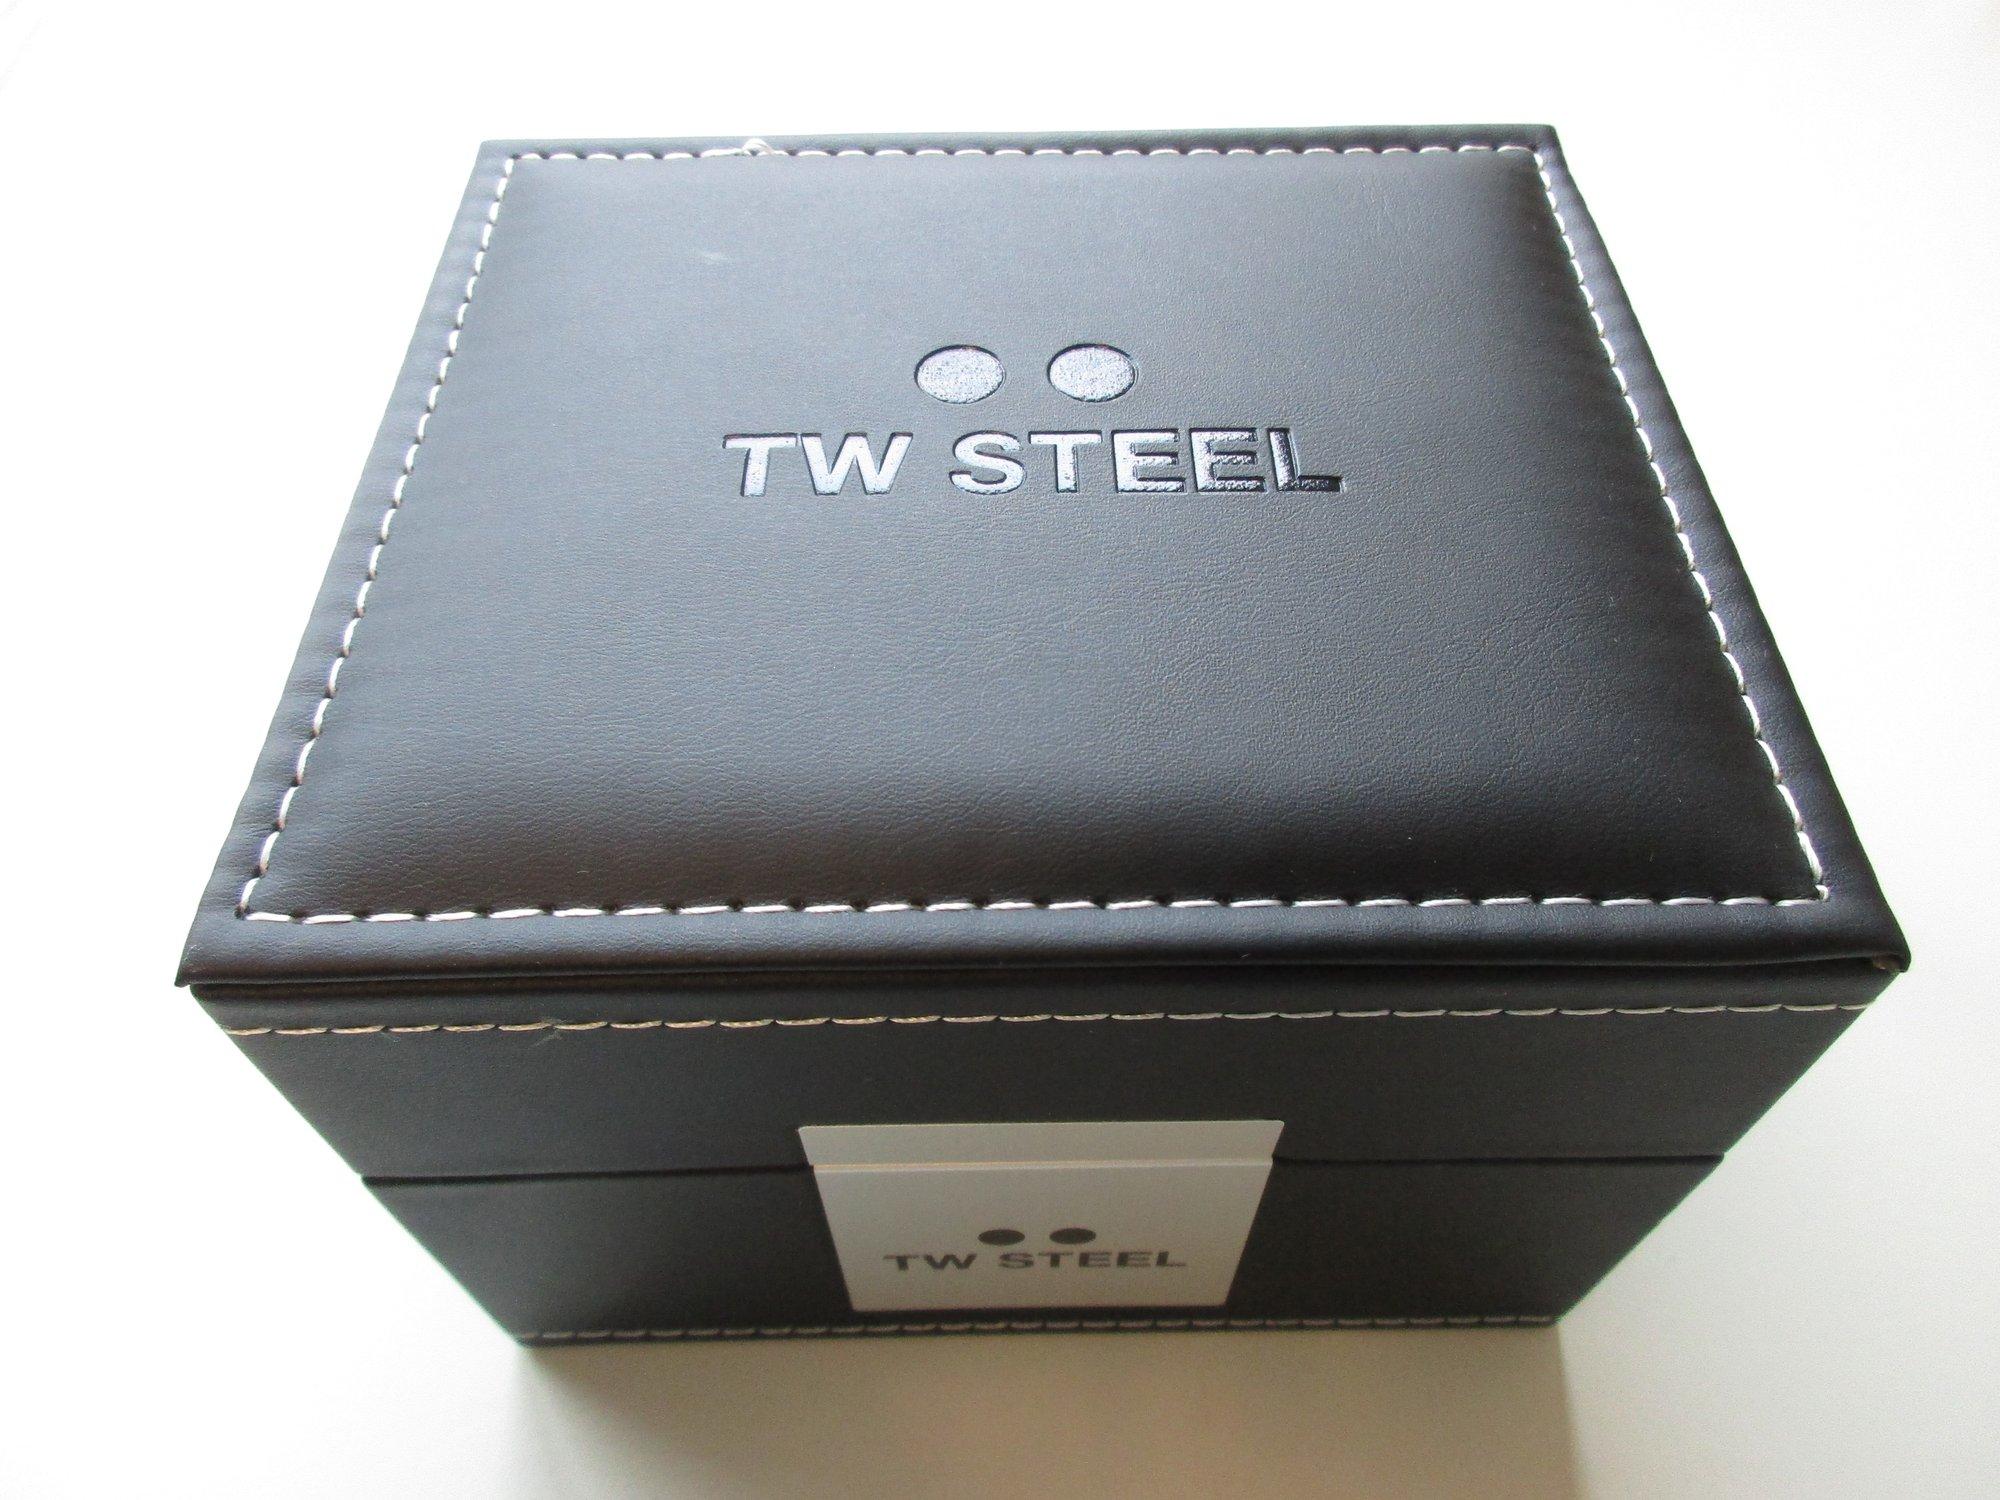 TW Steel Watch Canteen. The Canteen Style collection is readily identifiable by the cases featuring the hook crown cap and the leather straps with the two steel dots. The Canteen models embody TW Steels oversized DNA while continuing to evolve with